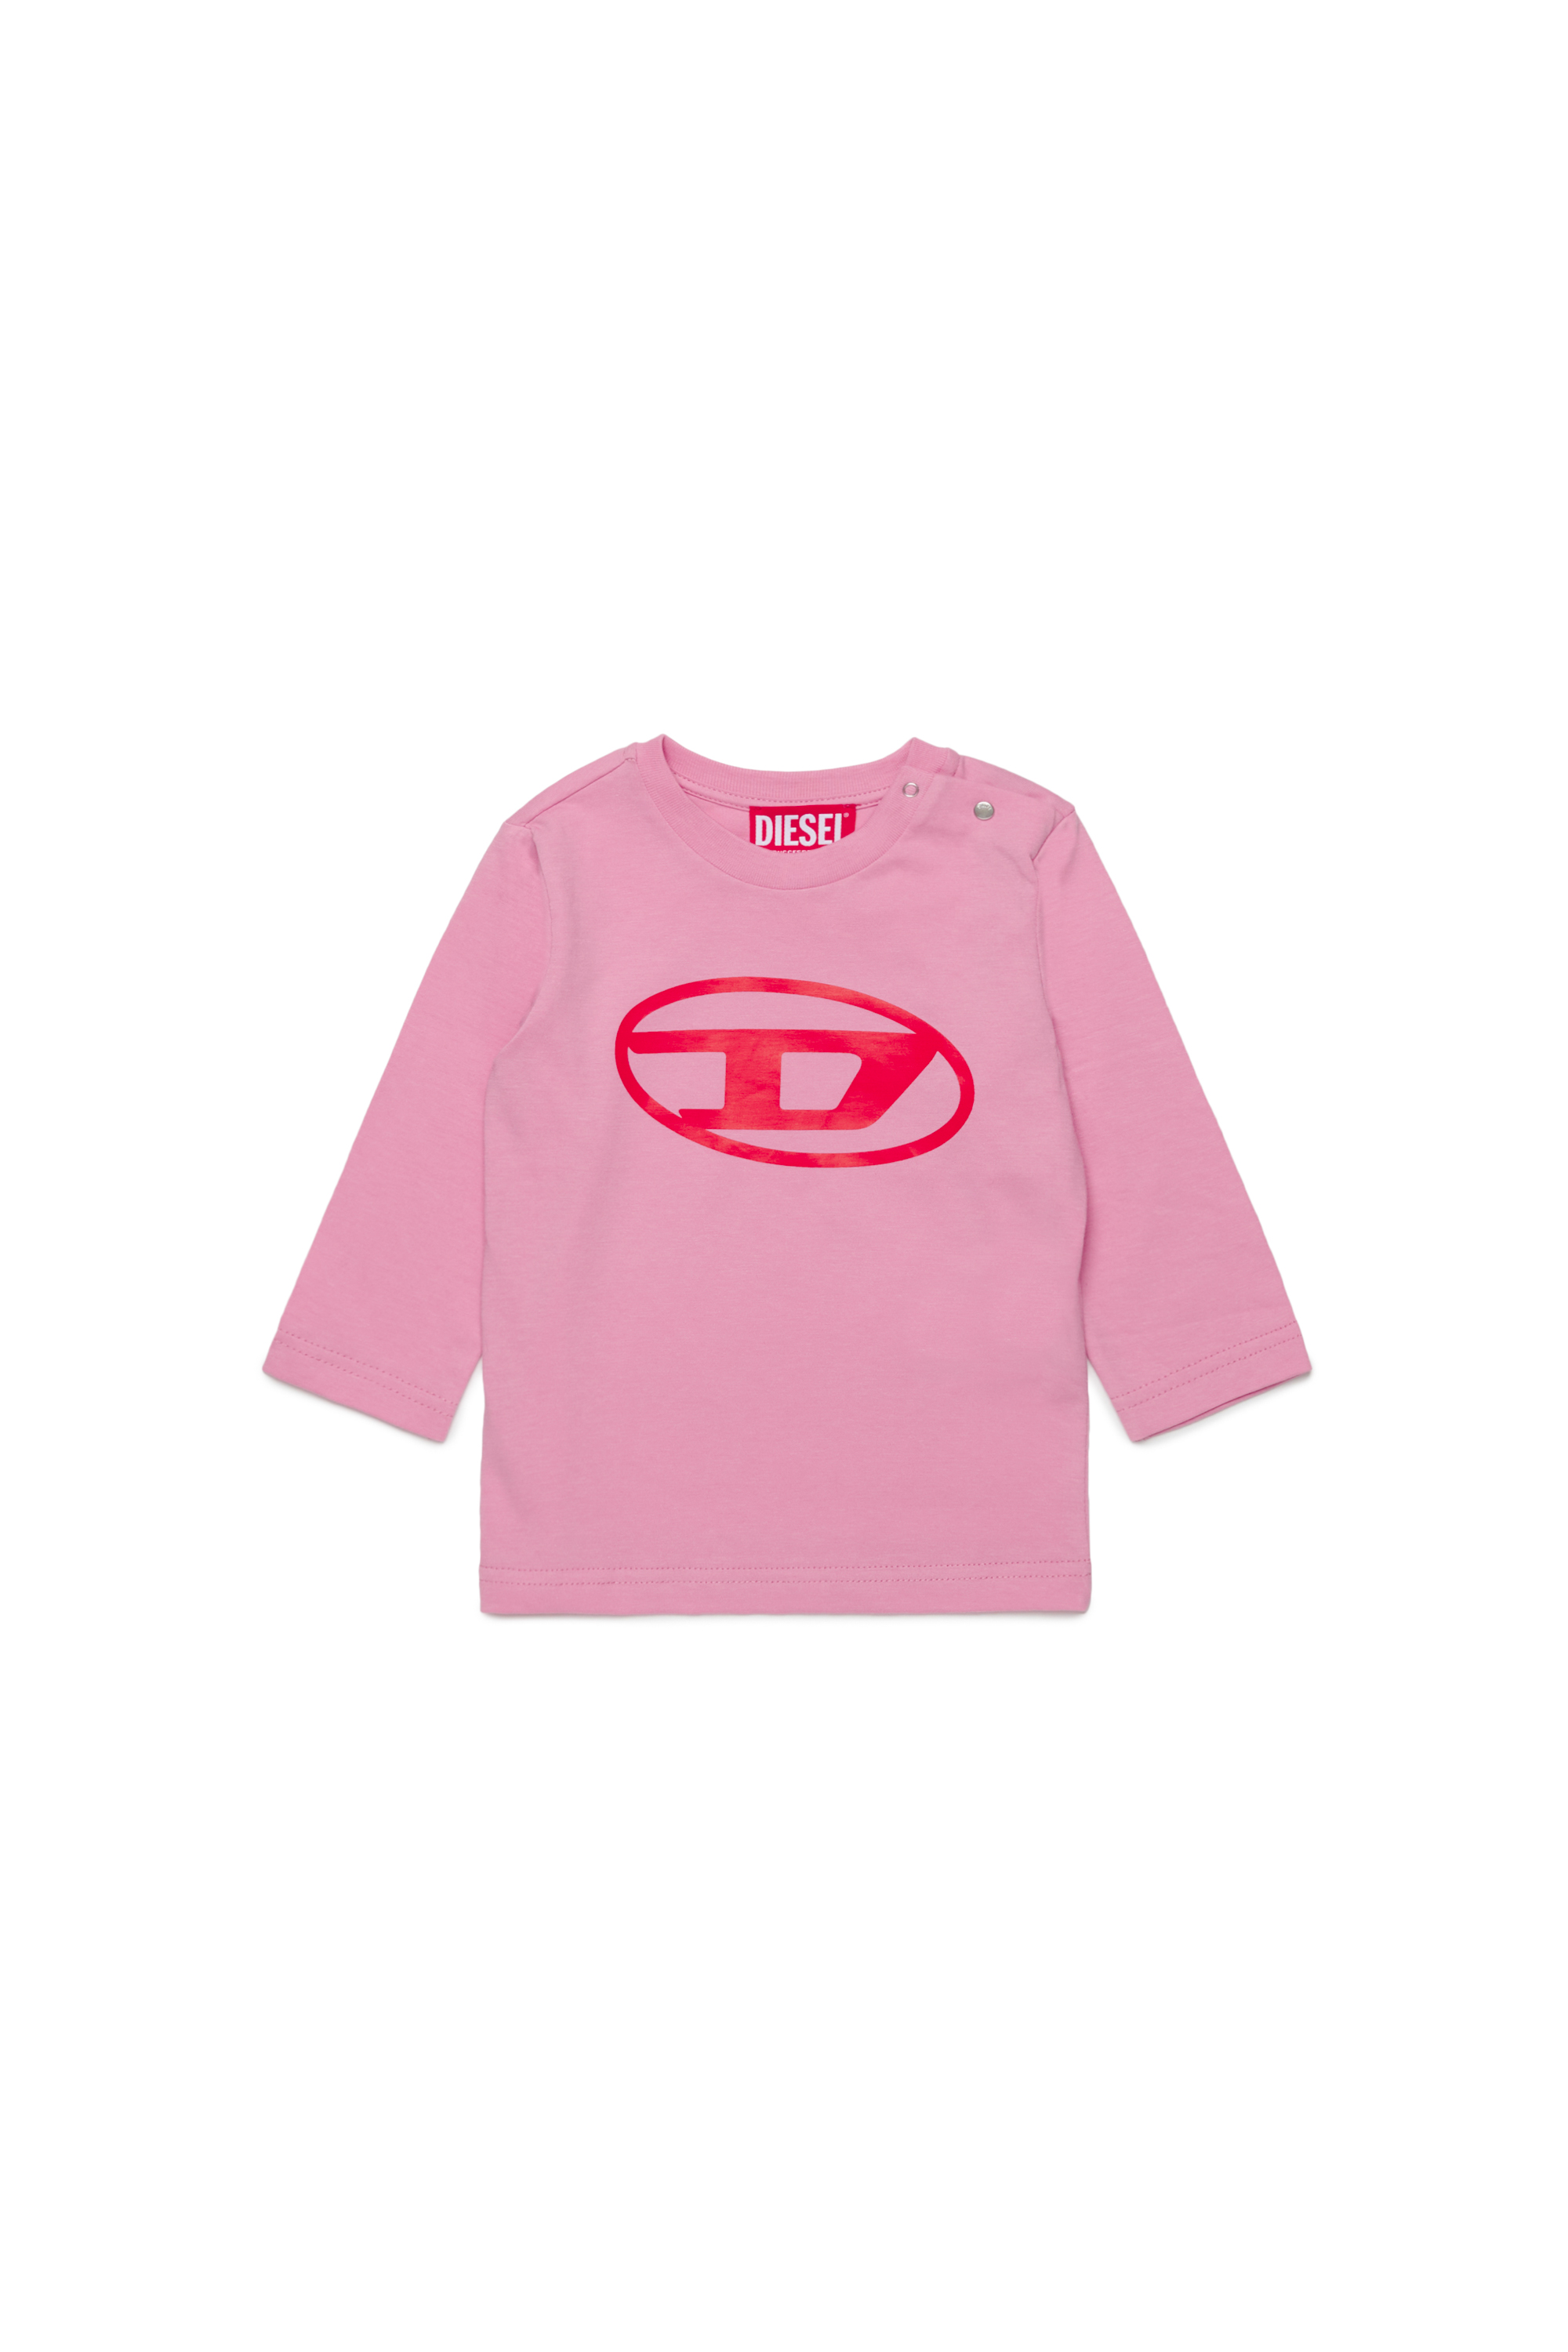 Diesel - TCERBLSB, Unisex Langarm-T-Shirt mit Oval D in Rosa - Image 1